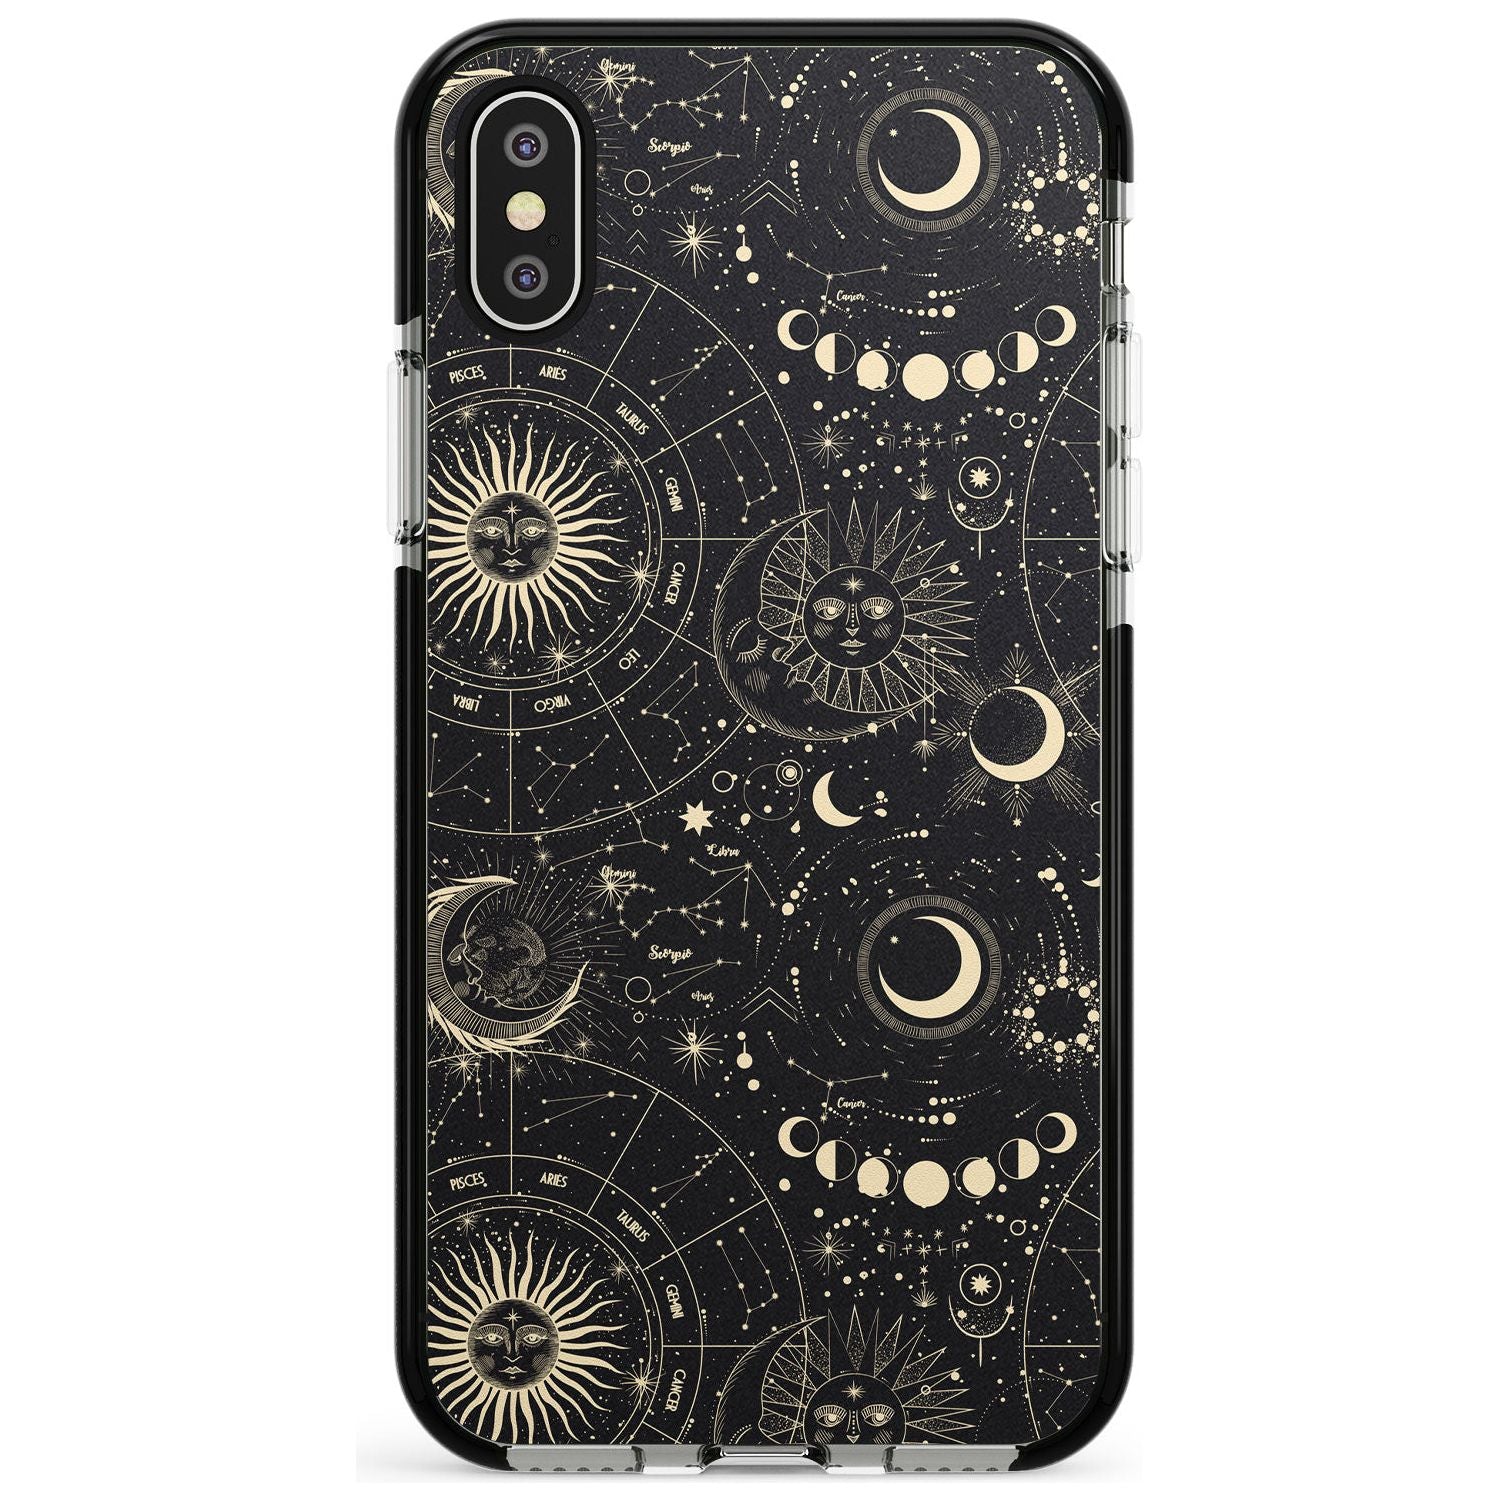 Suns, Moons & Star Signs Pink Fade Impact Phone Case for iPhone X XS Max XR